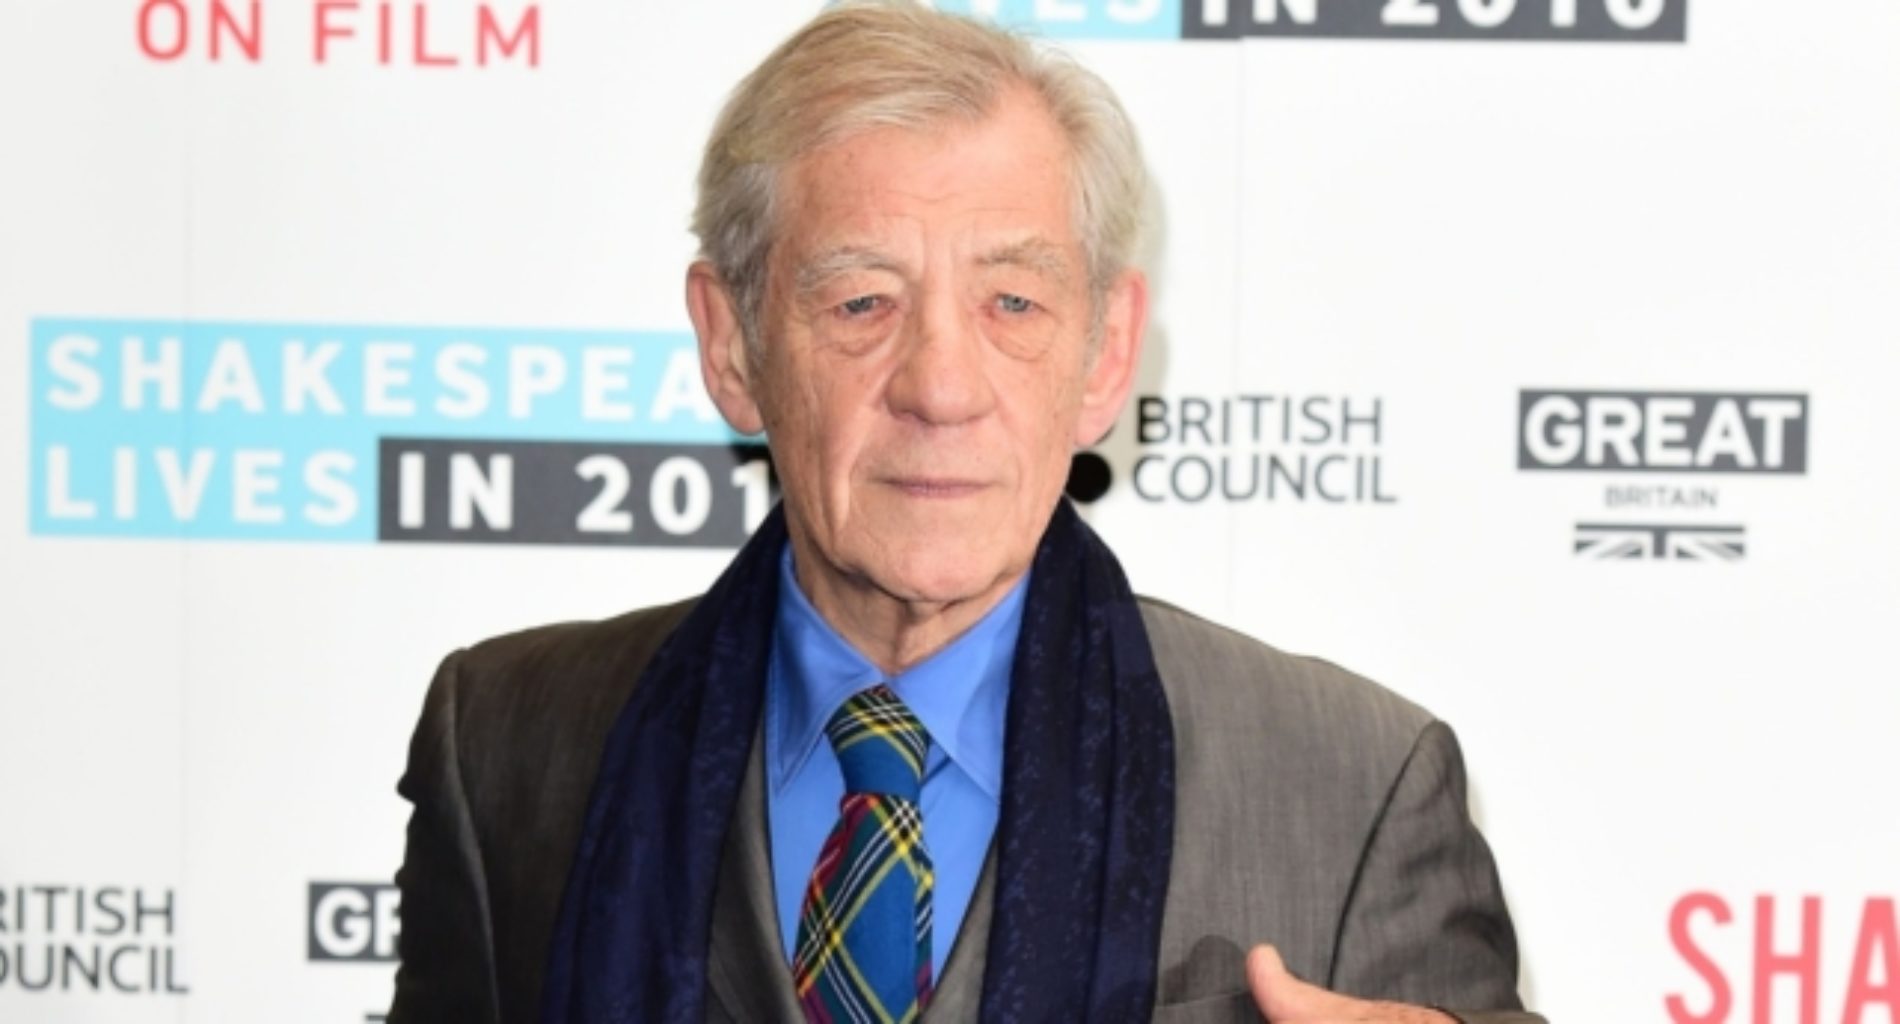 “Coming out is the best thing any gay person will ever do.” – Sir Ian McKellen